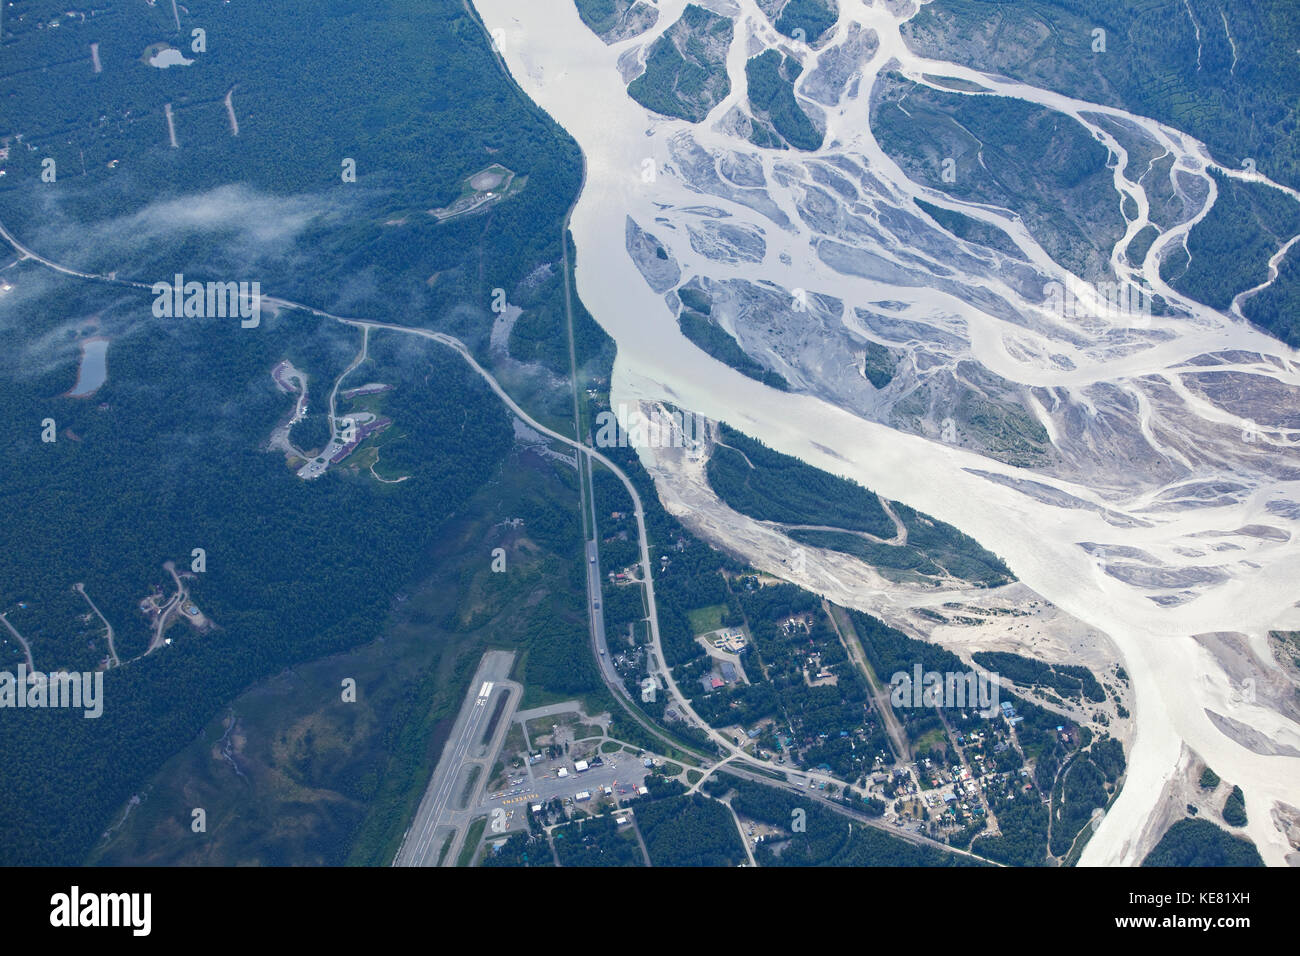 Aerial View Of Talkeetna, And The Susitna And Talkeetna Rivers, Southcentral Alaska, USA Stock Photo